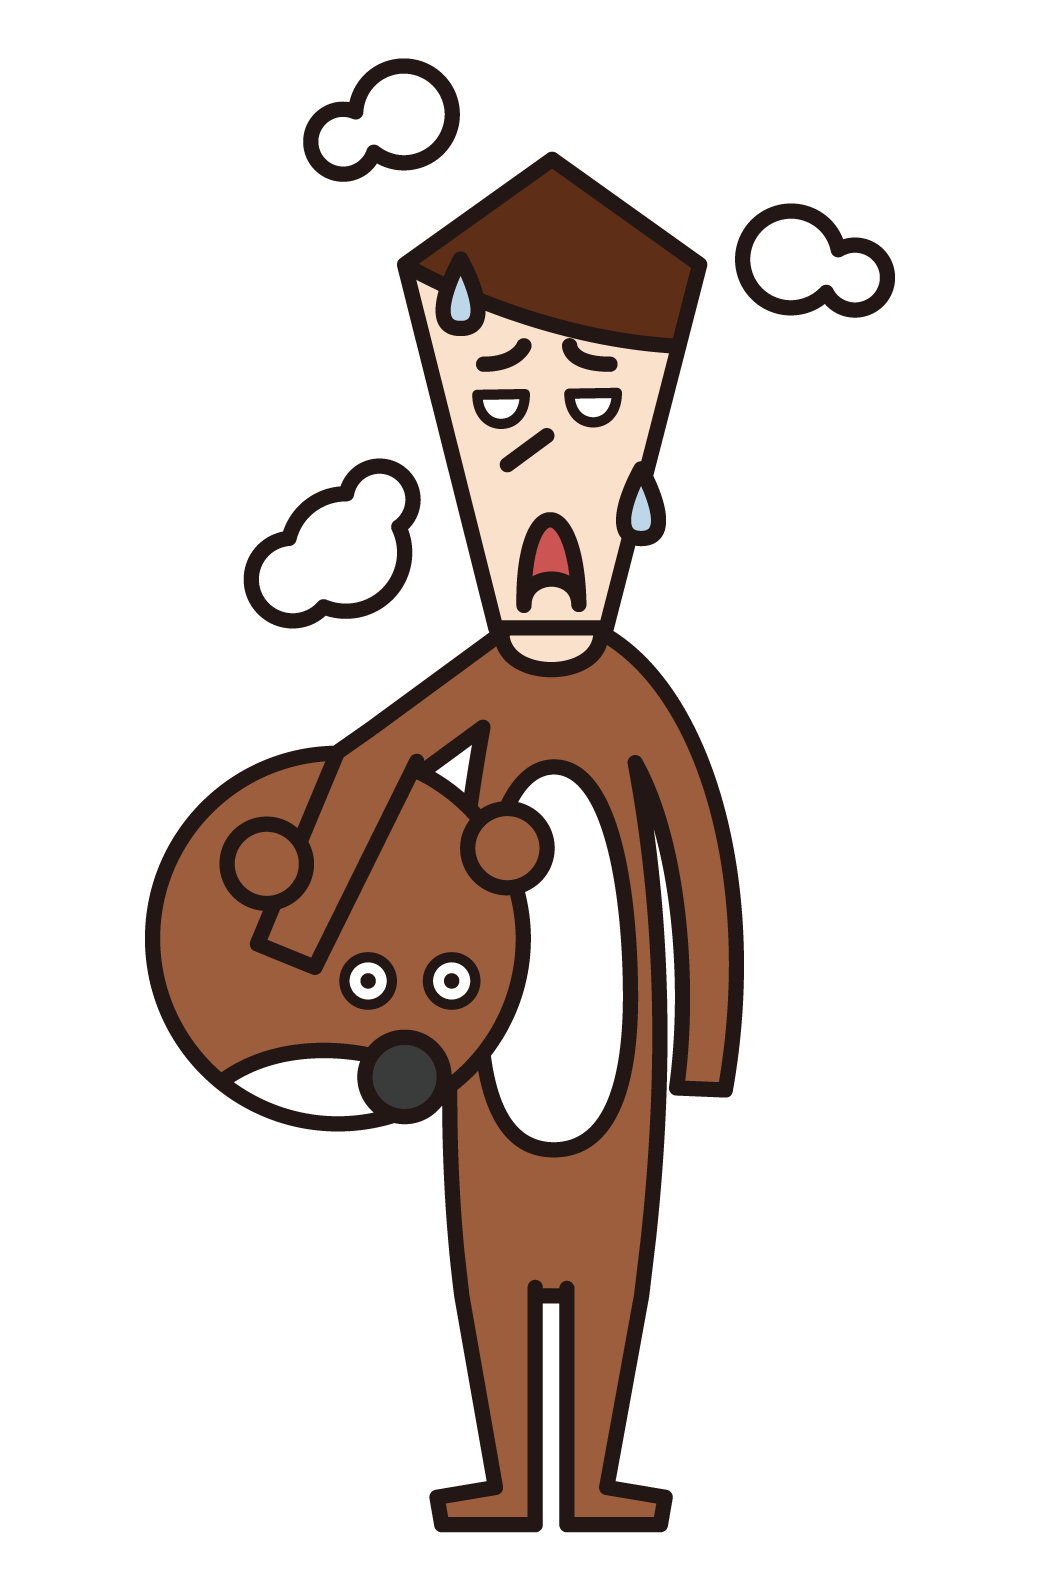 Illustration of a tired person (male) wearing a bear costume